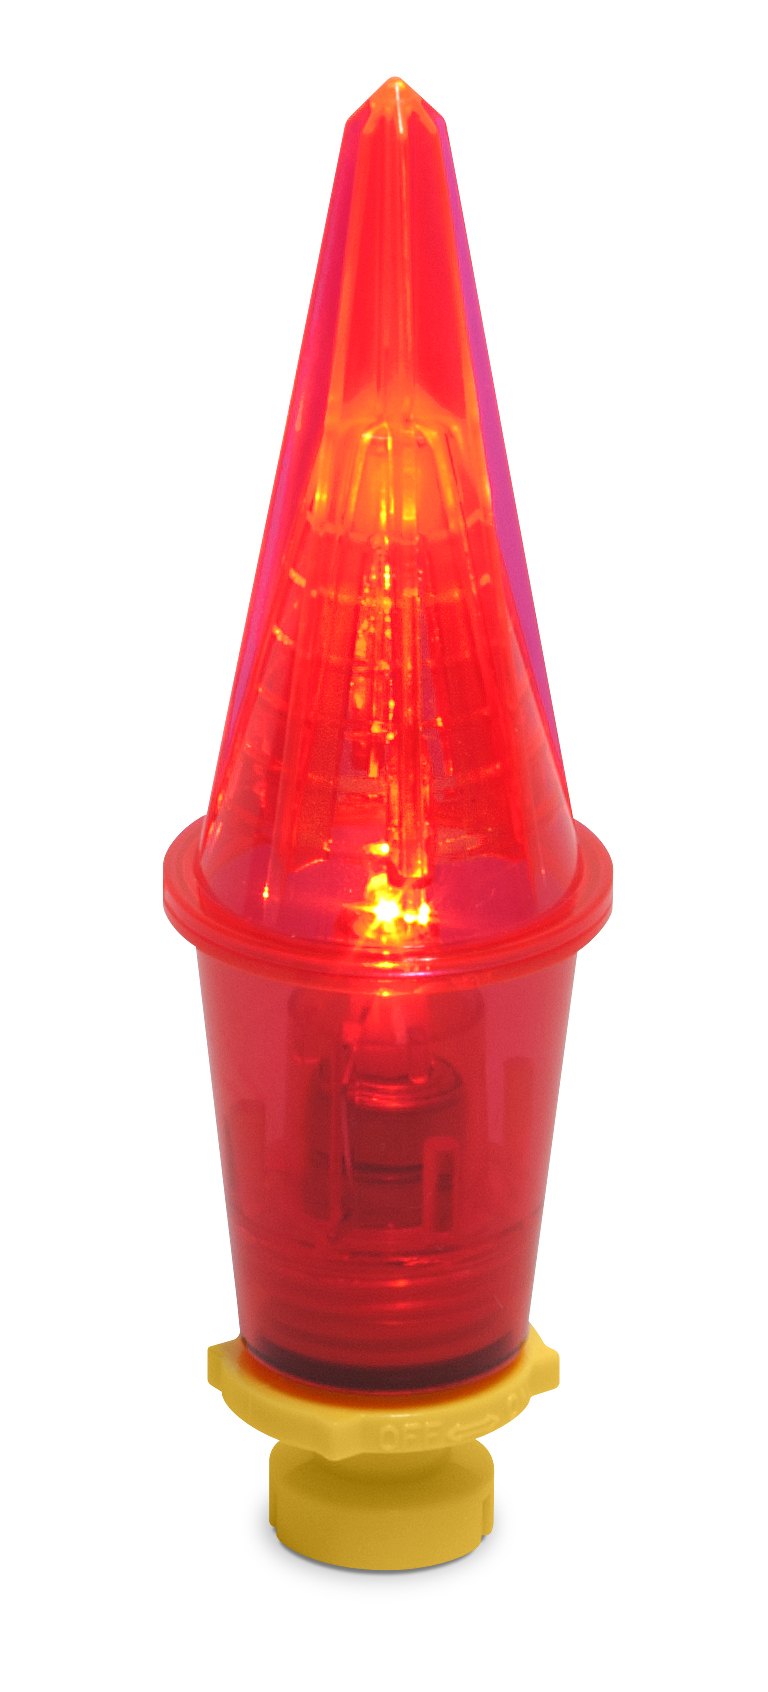 Rieadco NL118 Nibble Light Night Bobby Red